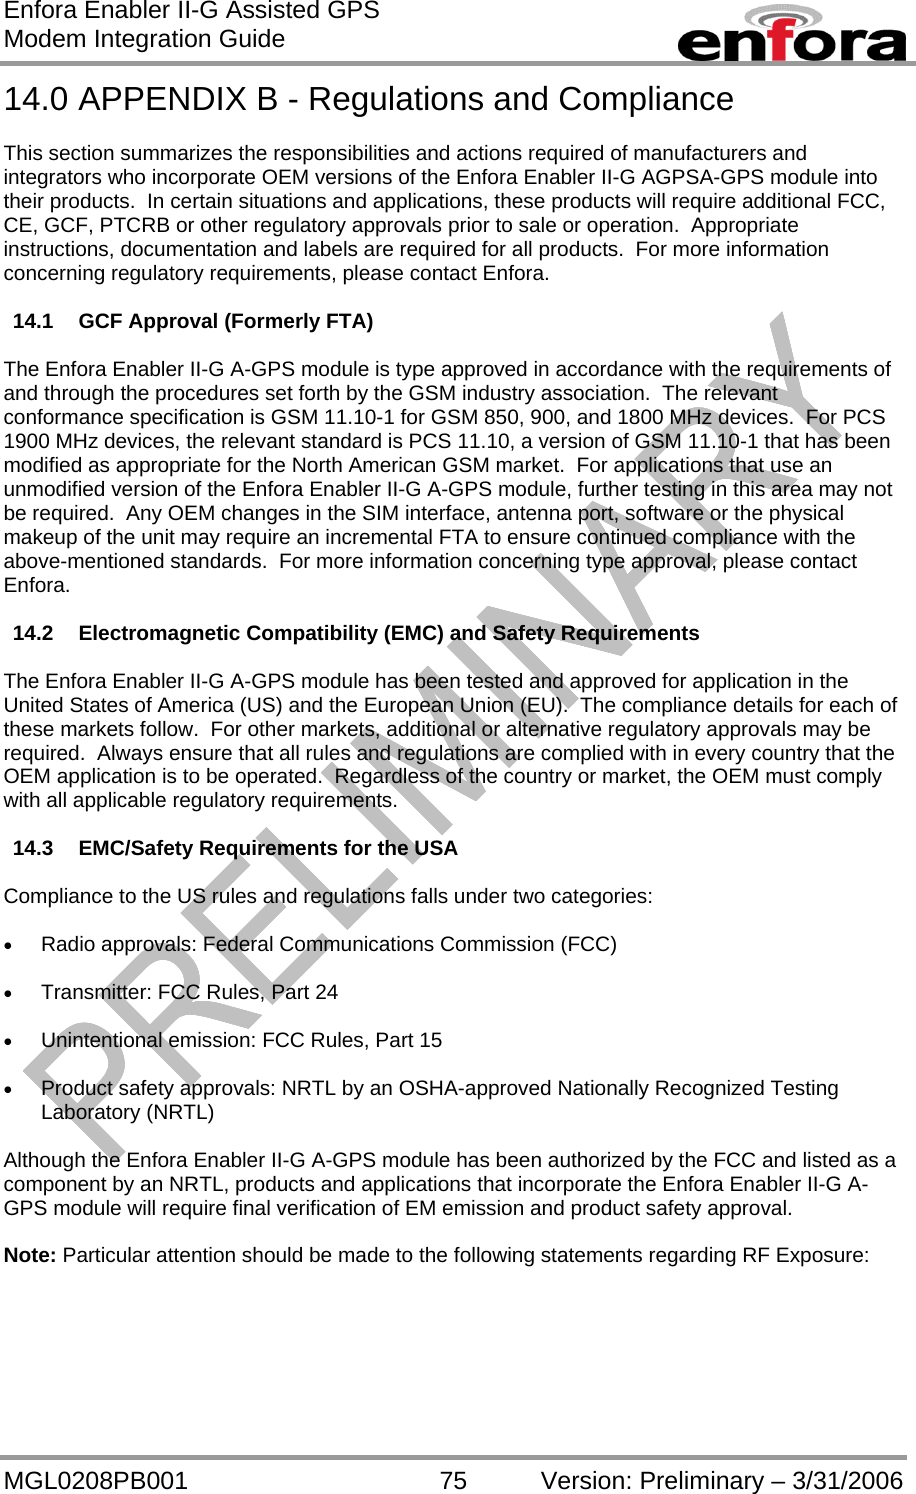 Enfora Enabler II-G Assisted GPS Modem Integration Guide MGL0208PB001 75 Version: Preliminary – 3/31/2006 14.0 APPENDIX B - Regulations and Compliance  This section summarizes the responsibilities and actions required of manufacturers and integrators who incorporate OEM versions of the Enfora Enabler II-G AGPSA-GPS module into their products.  In certain situations and applications, these products will require additional FCC, CE, GCF, PTCRB or other regulatory approvals prior to sale or operation.  Appropriate instructions, documentation and labels are required for all products.  For more information concerning regulatory requirements, please contact Enfora.  14.1 GCF Approval (Formerly FTA)  The Enfora Enabler II-G A-GPS module is type approved in accordance with the requirements of and through the procedures set forth by the GSM industry association.  The relevant conformance specification is GSM 11.10-1 for GSM 850, 900, and 1800 MHz devices.  For PCS 1900 MHz devices, the relevant standard is PCS 11.10, a version of GSM 11.10-1 that has been modified as appropriate for the North American GSM market.  For applications that use an unmodified version of the Enfora Enabler II-G A-GPS module, further testing in this area may not be required.  Any OEM changes in the SIM interface, antenna port, software or the physical makeup of the unit may require an incremental FTA to ensure continued compliance with the above-mentioned standards.  For more information concerning type approval, please contact Enfora.  14.2 Electromagnetic Compatibility (EMC) and Safety Requirements  The Enfora Enabler II-G A-GPS module has been tested and approved for application in the United States of America (US) and the European Union (EU).  The compliance details for each of these markets follow.  For other markets, additional or alternative regulatory approvals may be required.  Always ensure that all rules and regulations are complied with in every country that the OEM application is to be operated.  Regardless of the country or market, the OEM must comply with all applicable regulatory requirements.  14.3  EMC/Safety Requirements for the USA  Compliance to the US rules and regulations falls under two categories:  •  Radio approvals: Federal Communications Commission (FCC)  •  Transmitter: FCC Rules, Part 24  •  Unintentional emission: FCC Rules, Part 15  •  Product safety approvals: NRTL by an OSHA-approved Nationally Recognized Testing Laboratory (NRTL)  Although the Enfora Enabler II-G A-GPS module has been authorized by the FCC and listed as a component by an NRTL, products and applications that incorporate the Enfora Enabler II-G A-GPS module will require final verification of EM emission and product safety approval.  Note: Particular attention should be made to the following statements regarding RF Exposure: 